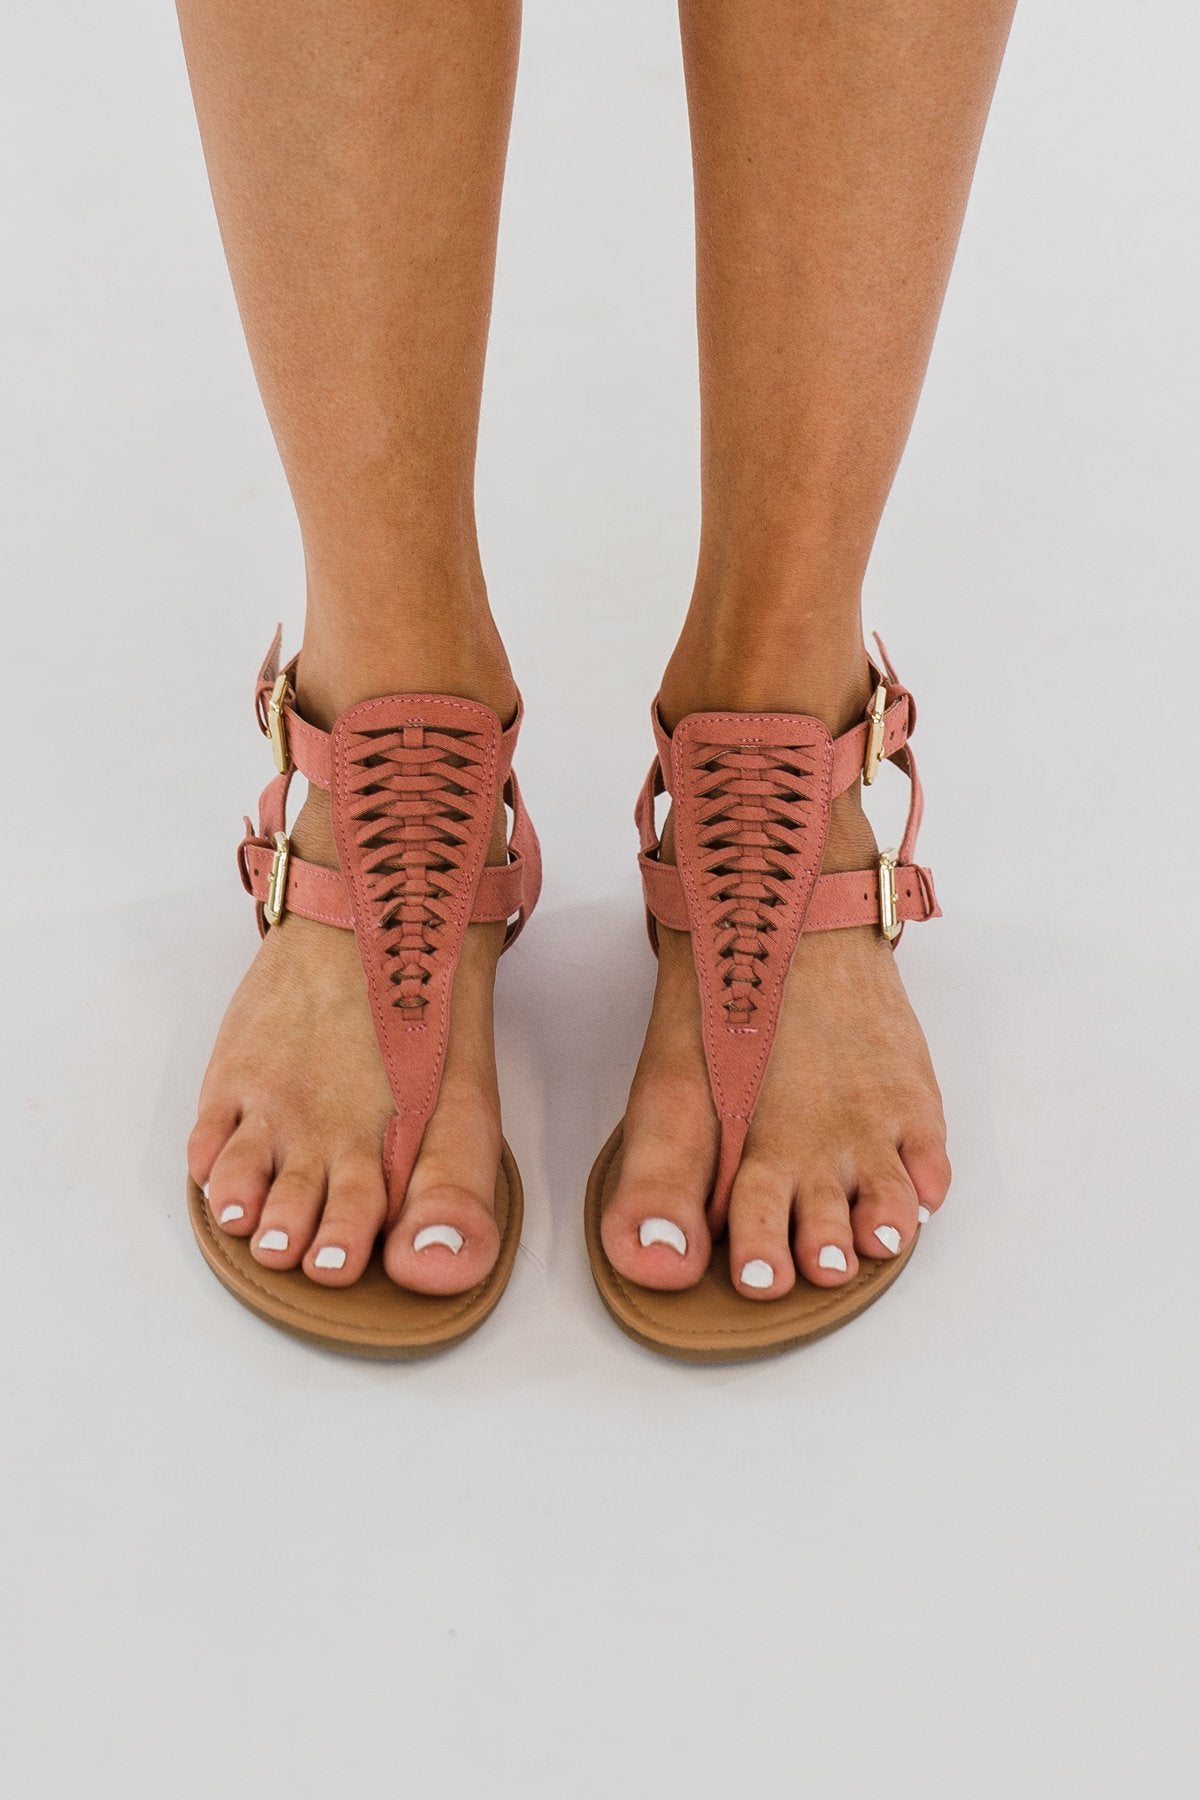 Qupid Archer Sandals- Dusty Rose Suede